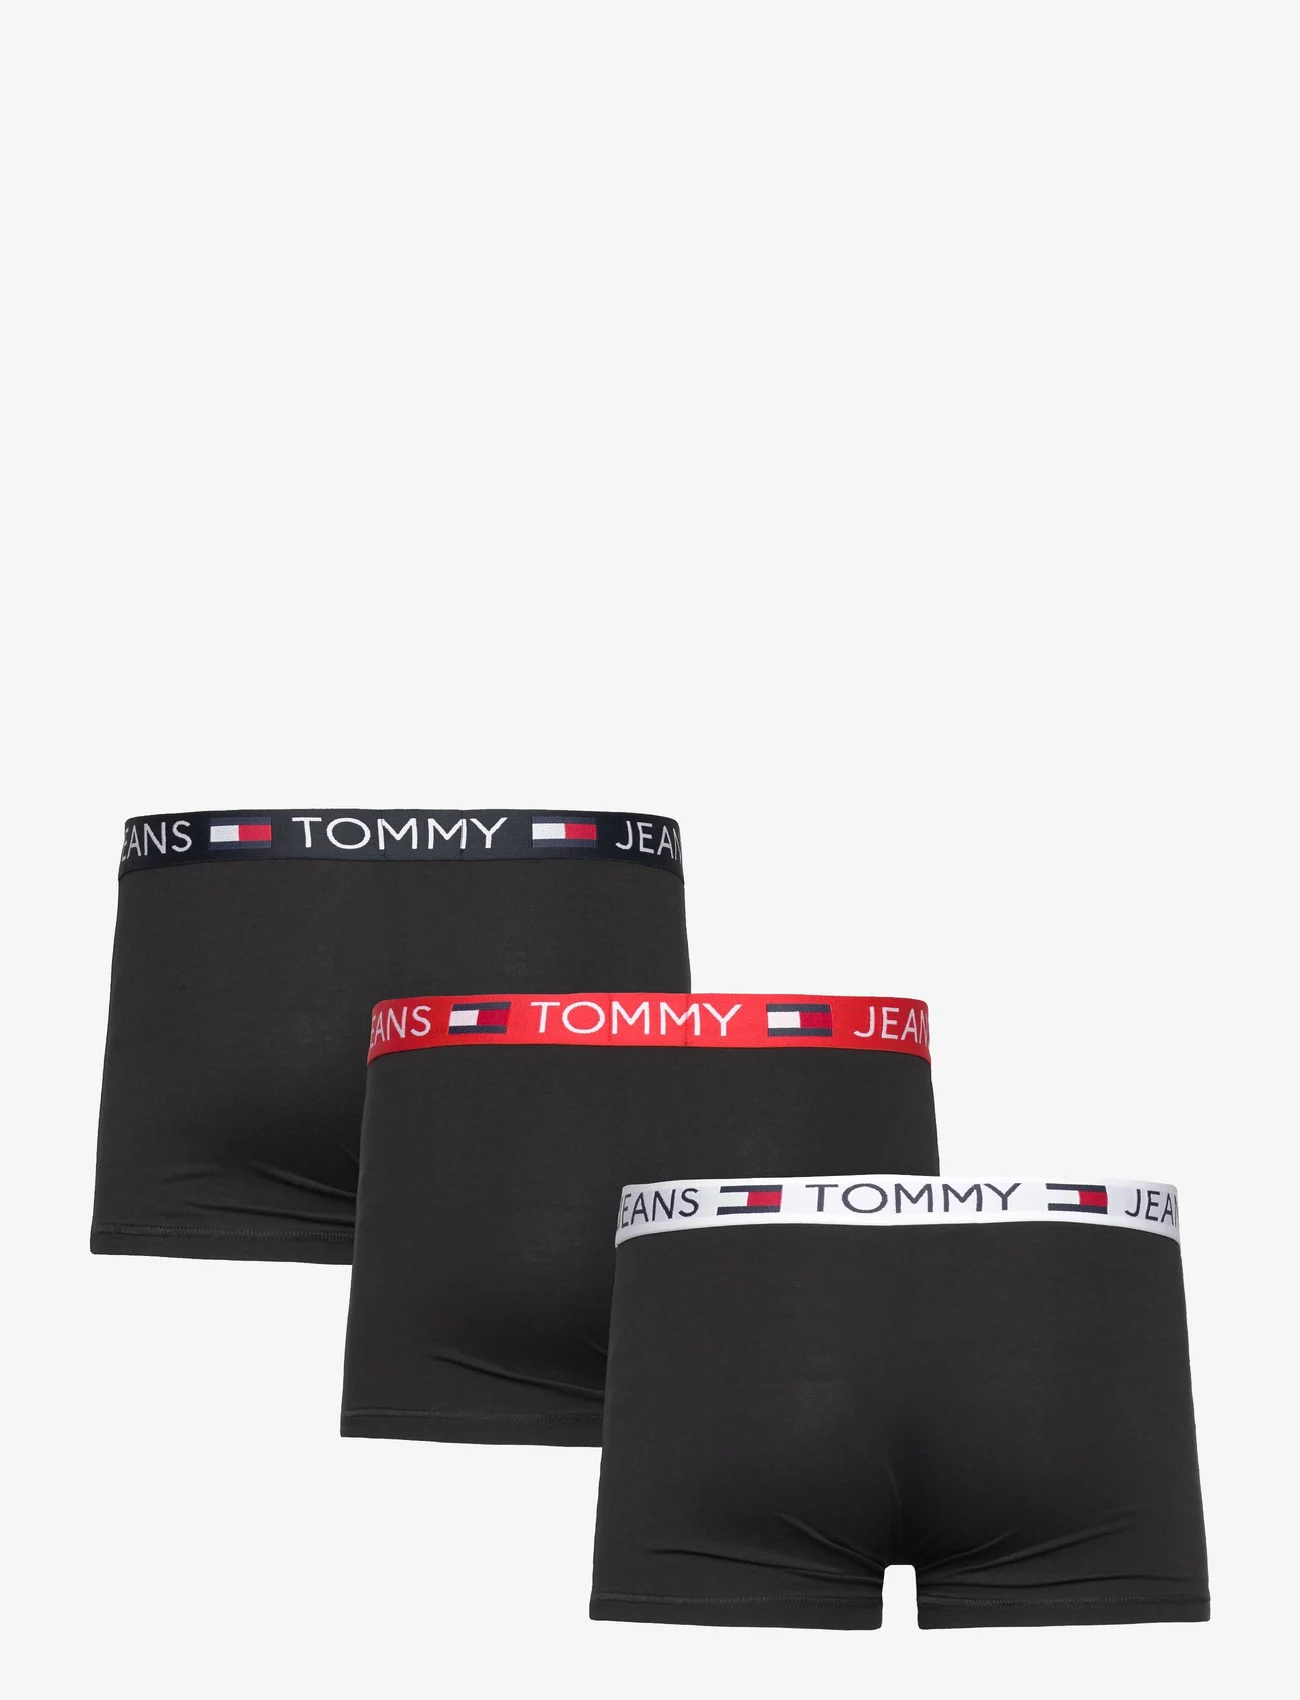 Tommy Hilfiger - 3P TRUNK WB - boxer briefs - hot heat/whte/drk ngh nvy - 1